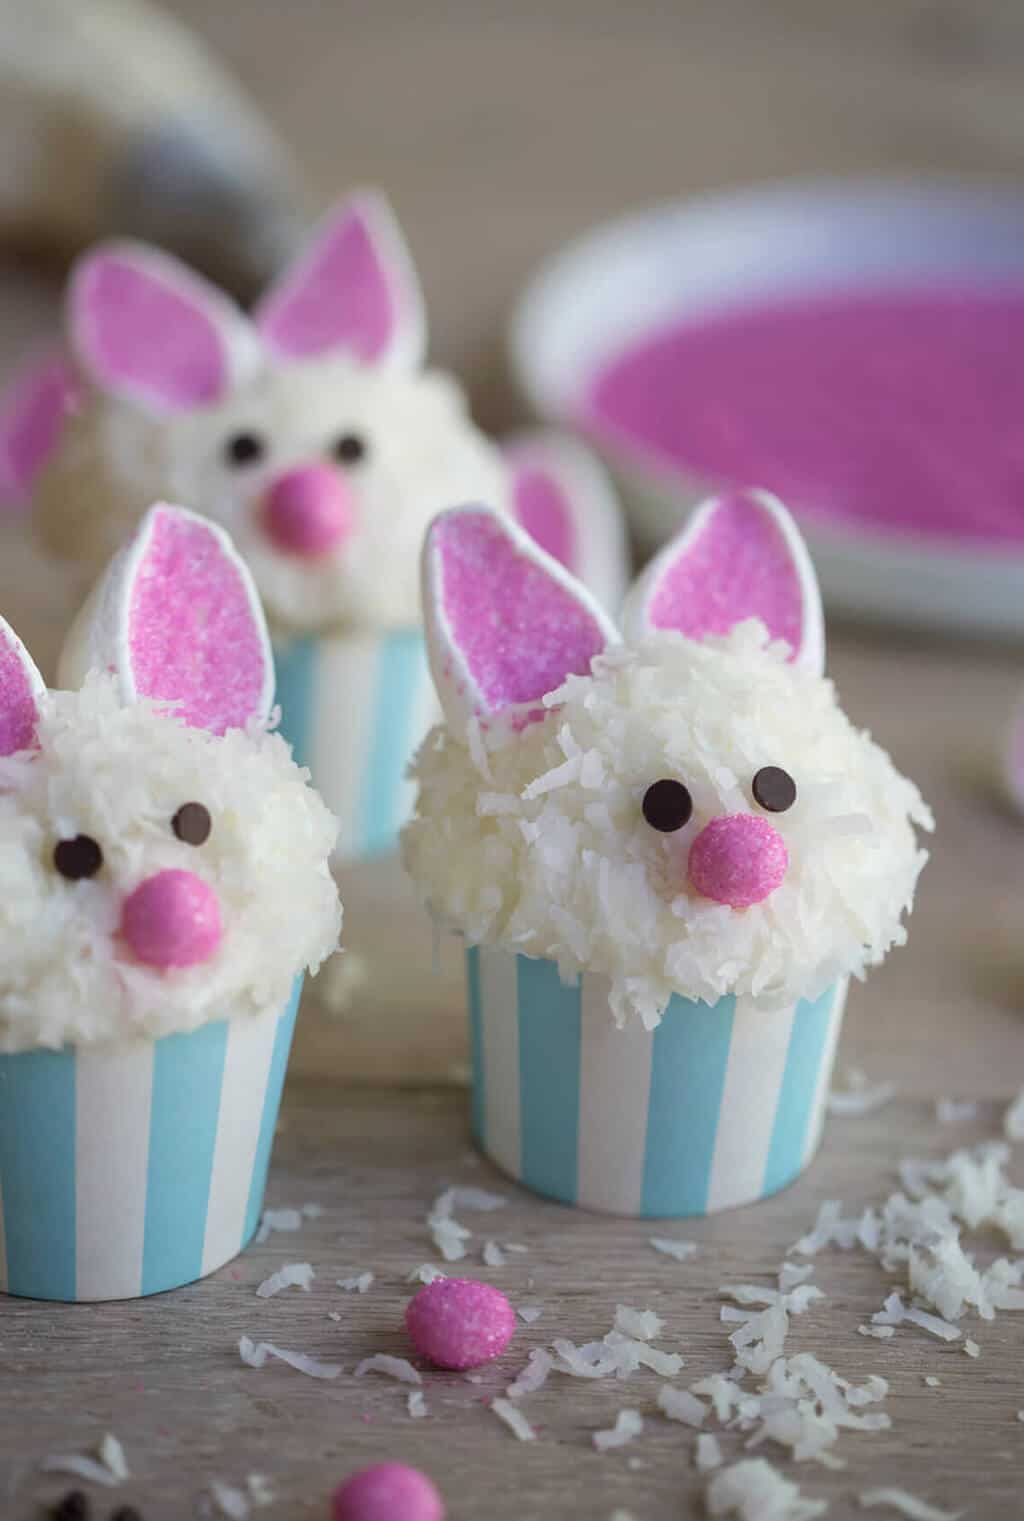 21 Easy Easter Dessert Recipes That You'll Love | Cute Desserts